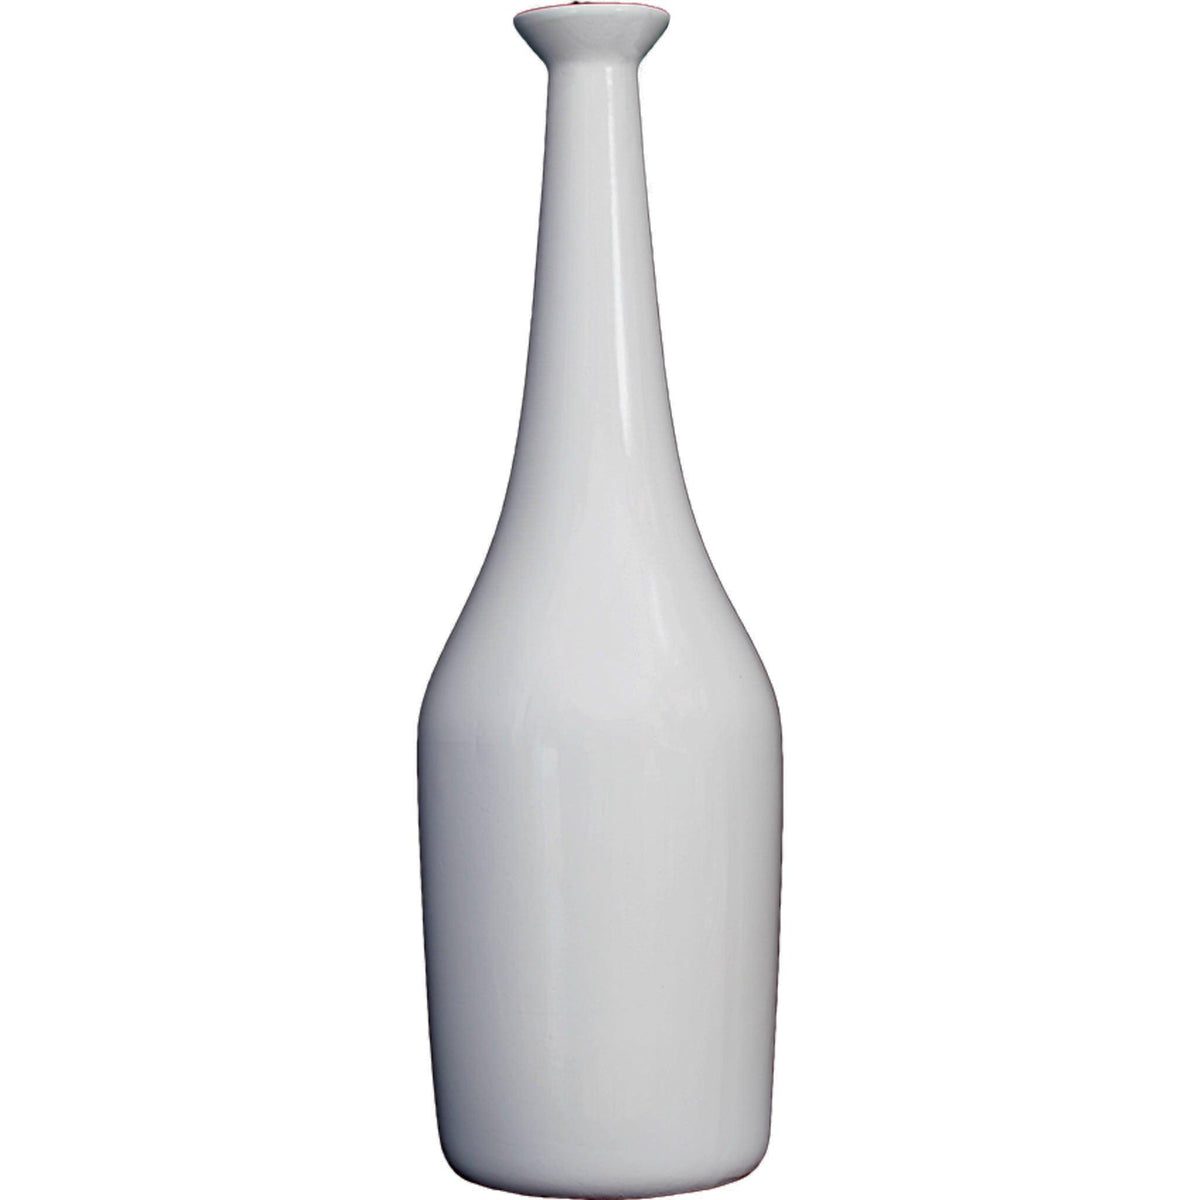 Lee Display's brand new Milk Bottle Shaped Ceramic Vase comes in a high gloss white finish on sale at leedisplay.com